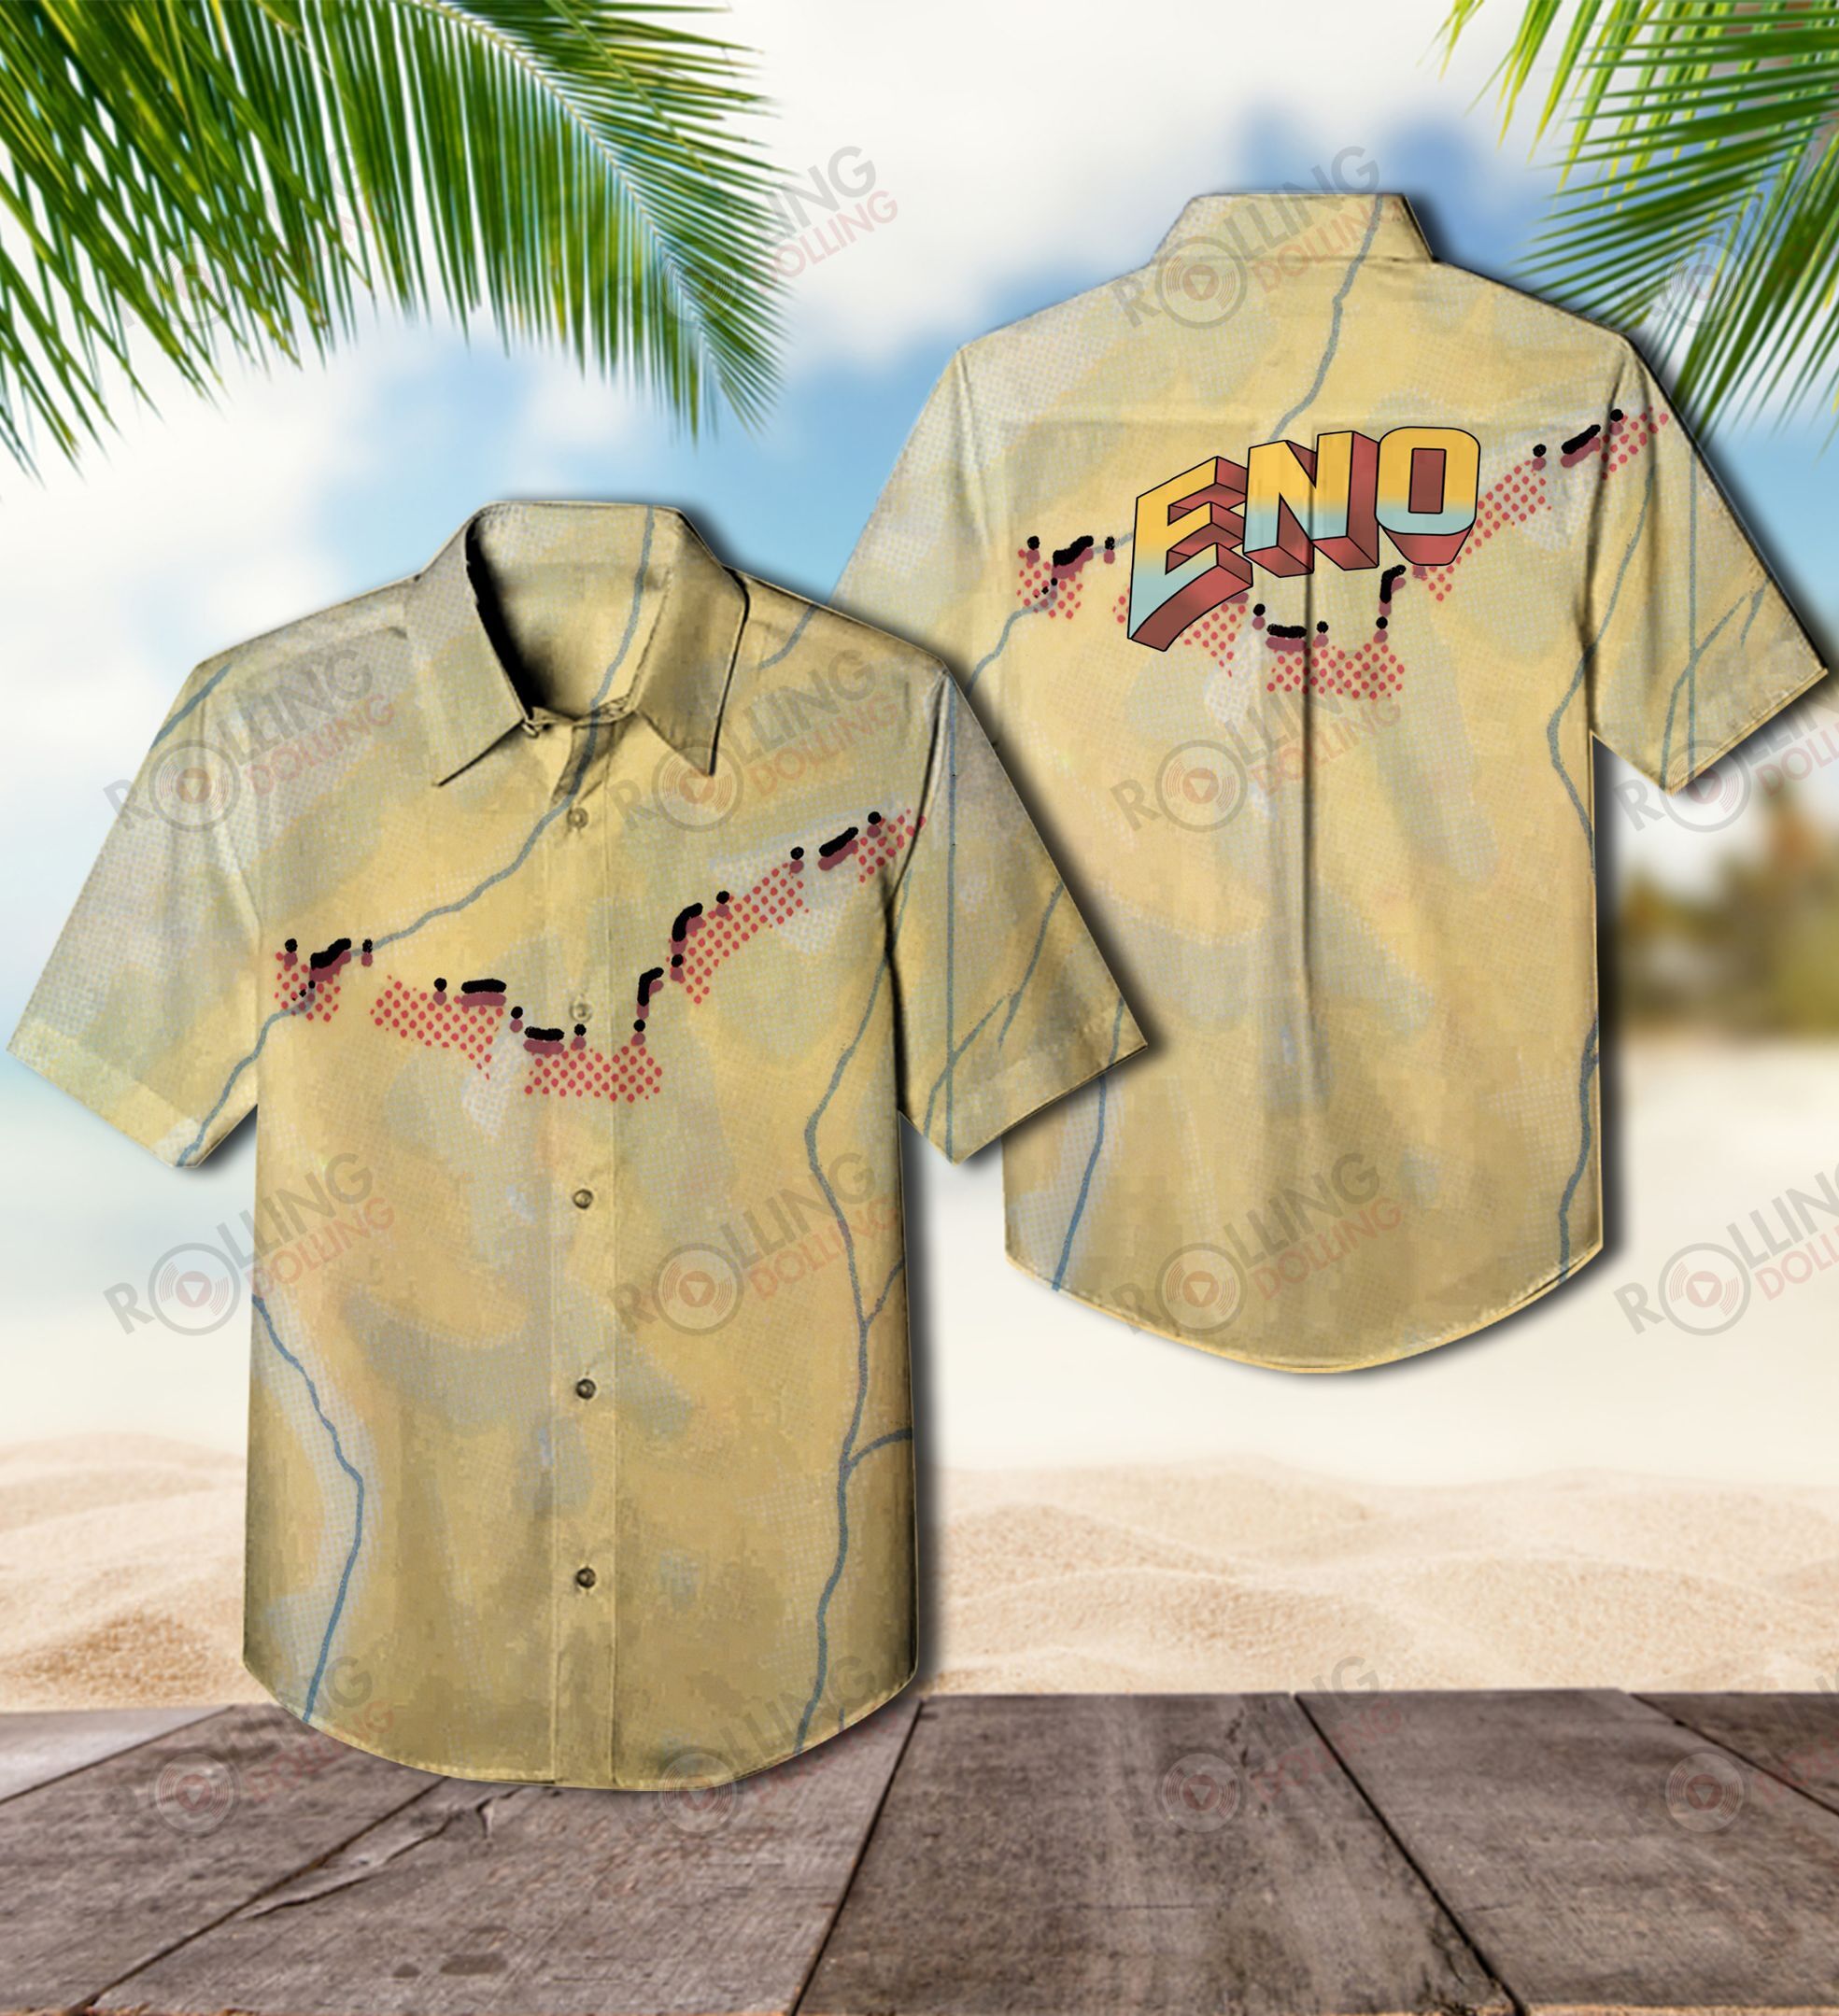 The Hawaiian Shirt is a popular shirt that is worn by Rock band fans 39